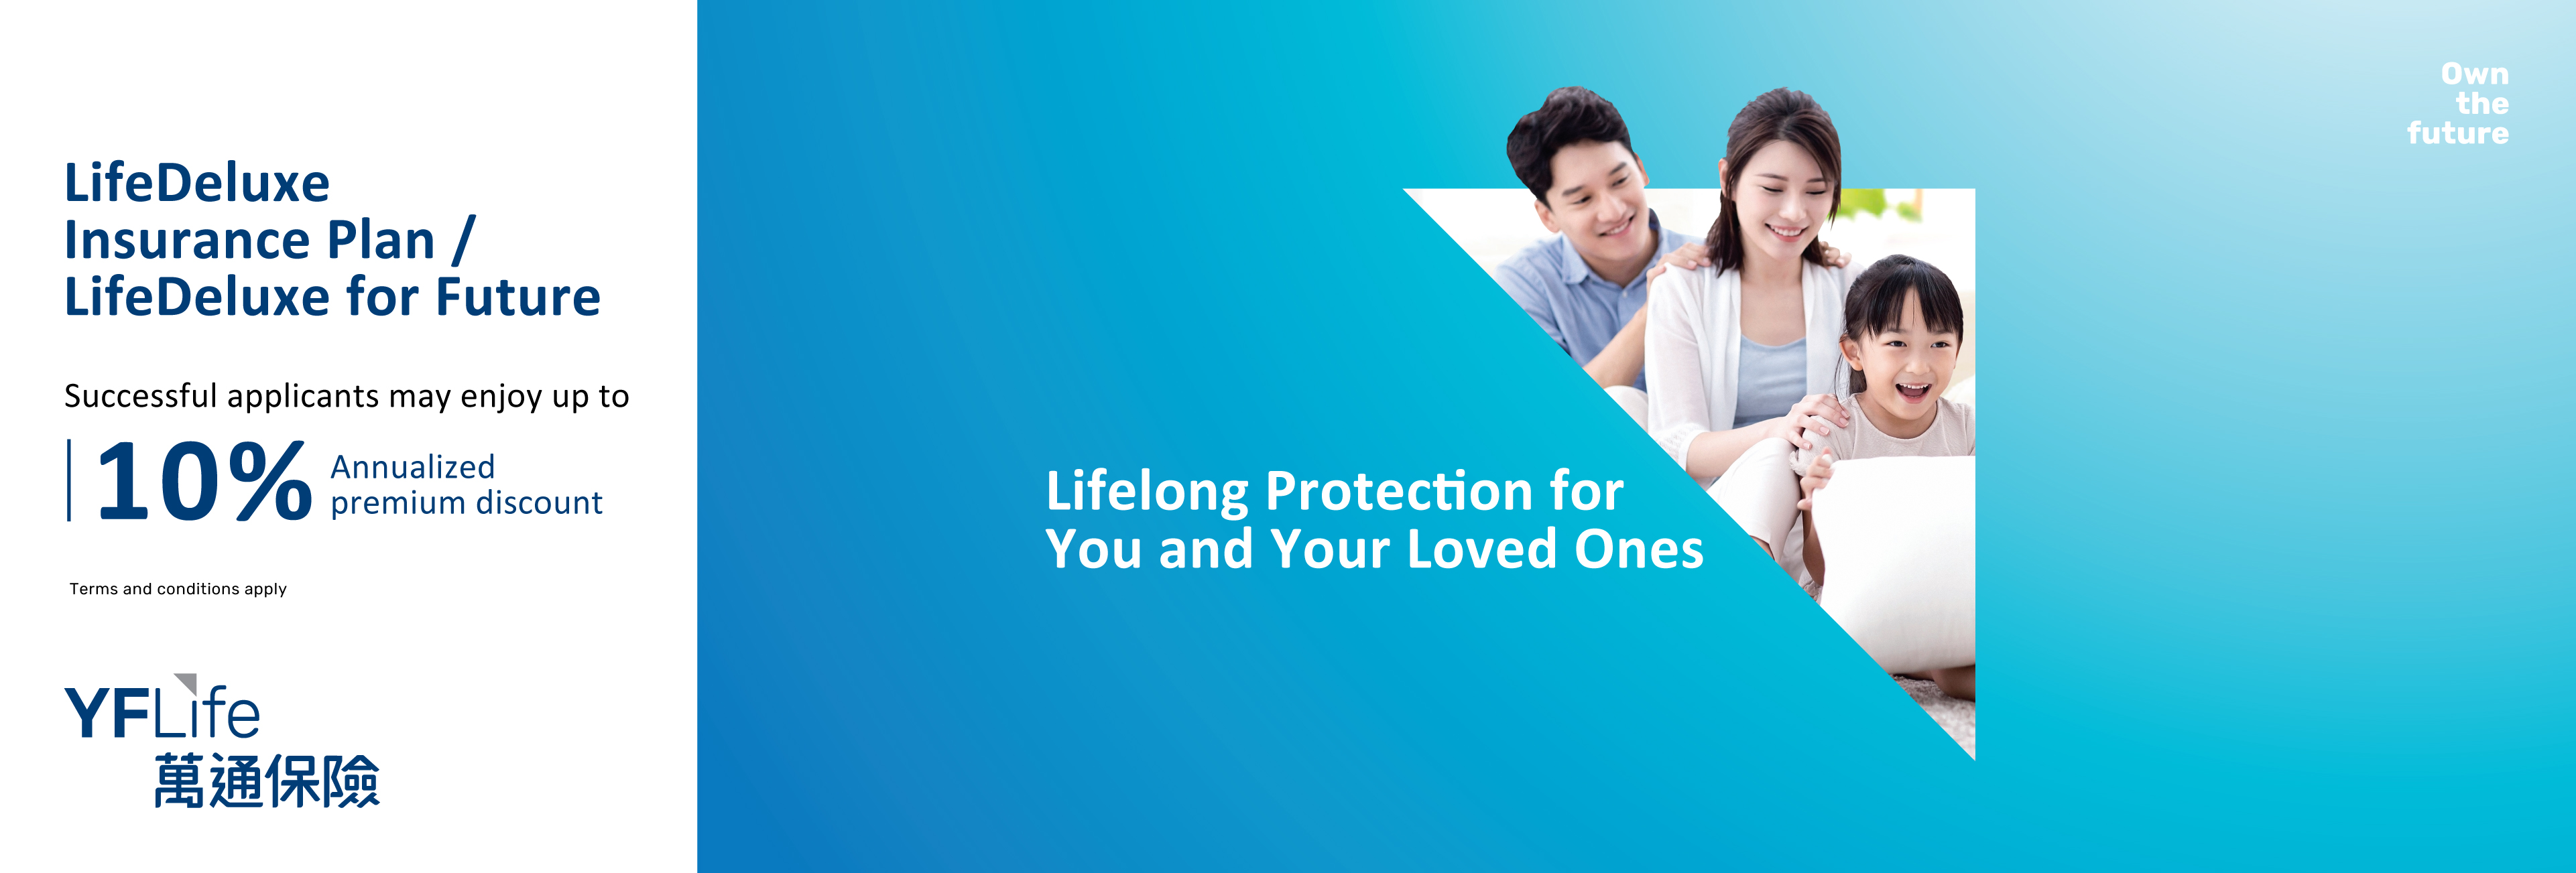 LifeDeluxe Insurance Plan/LifeDeluxe for Future